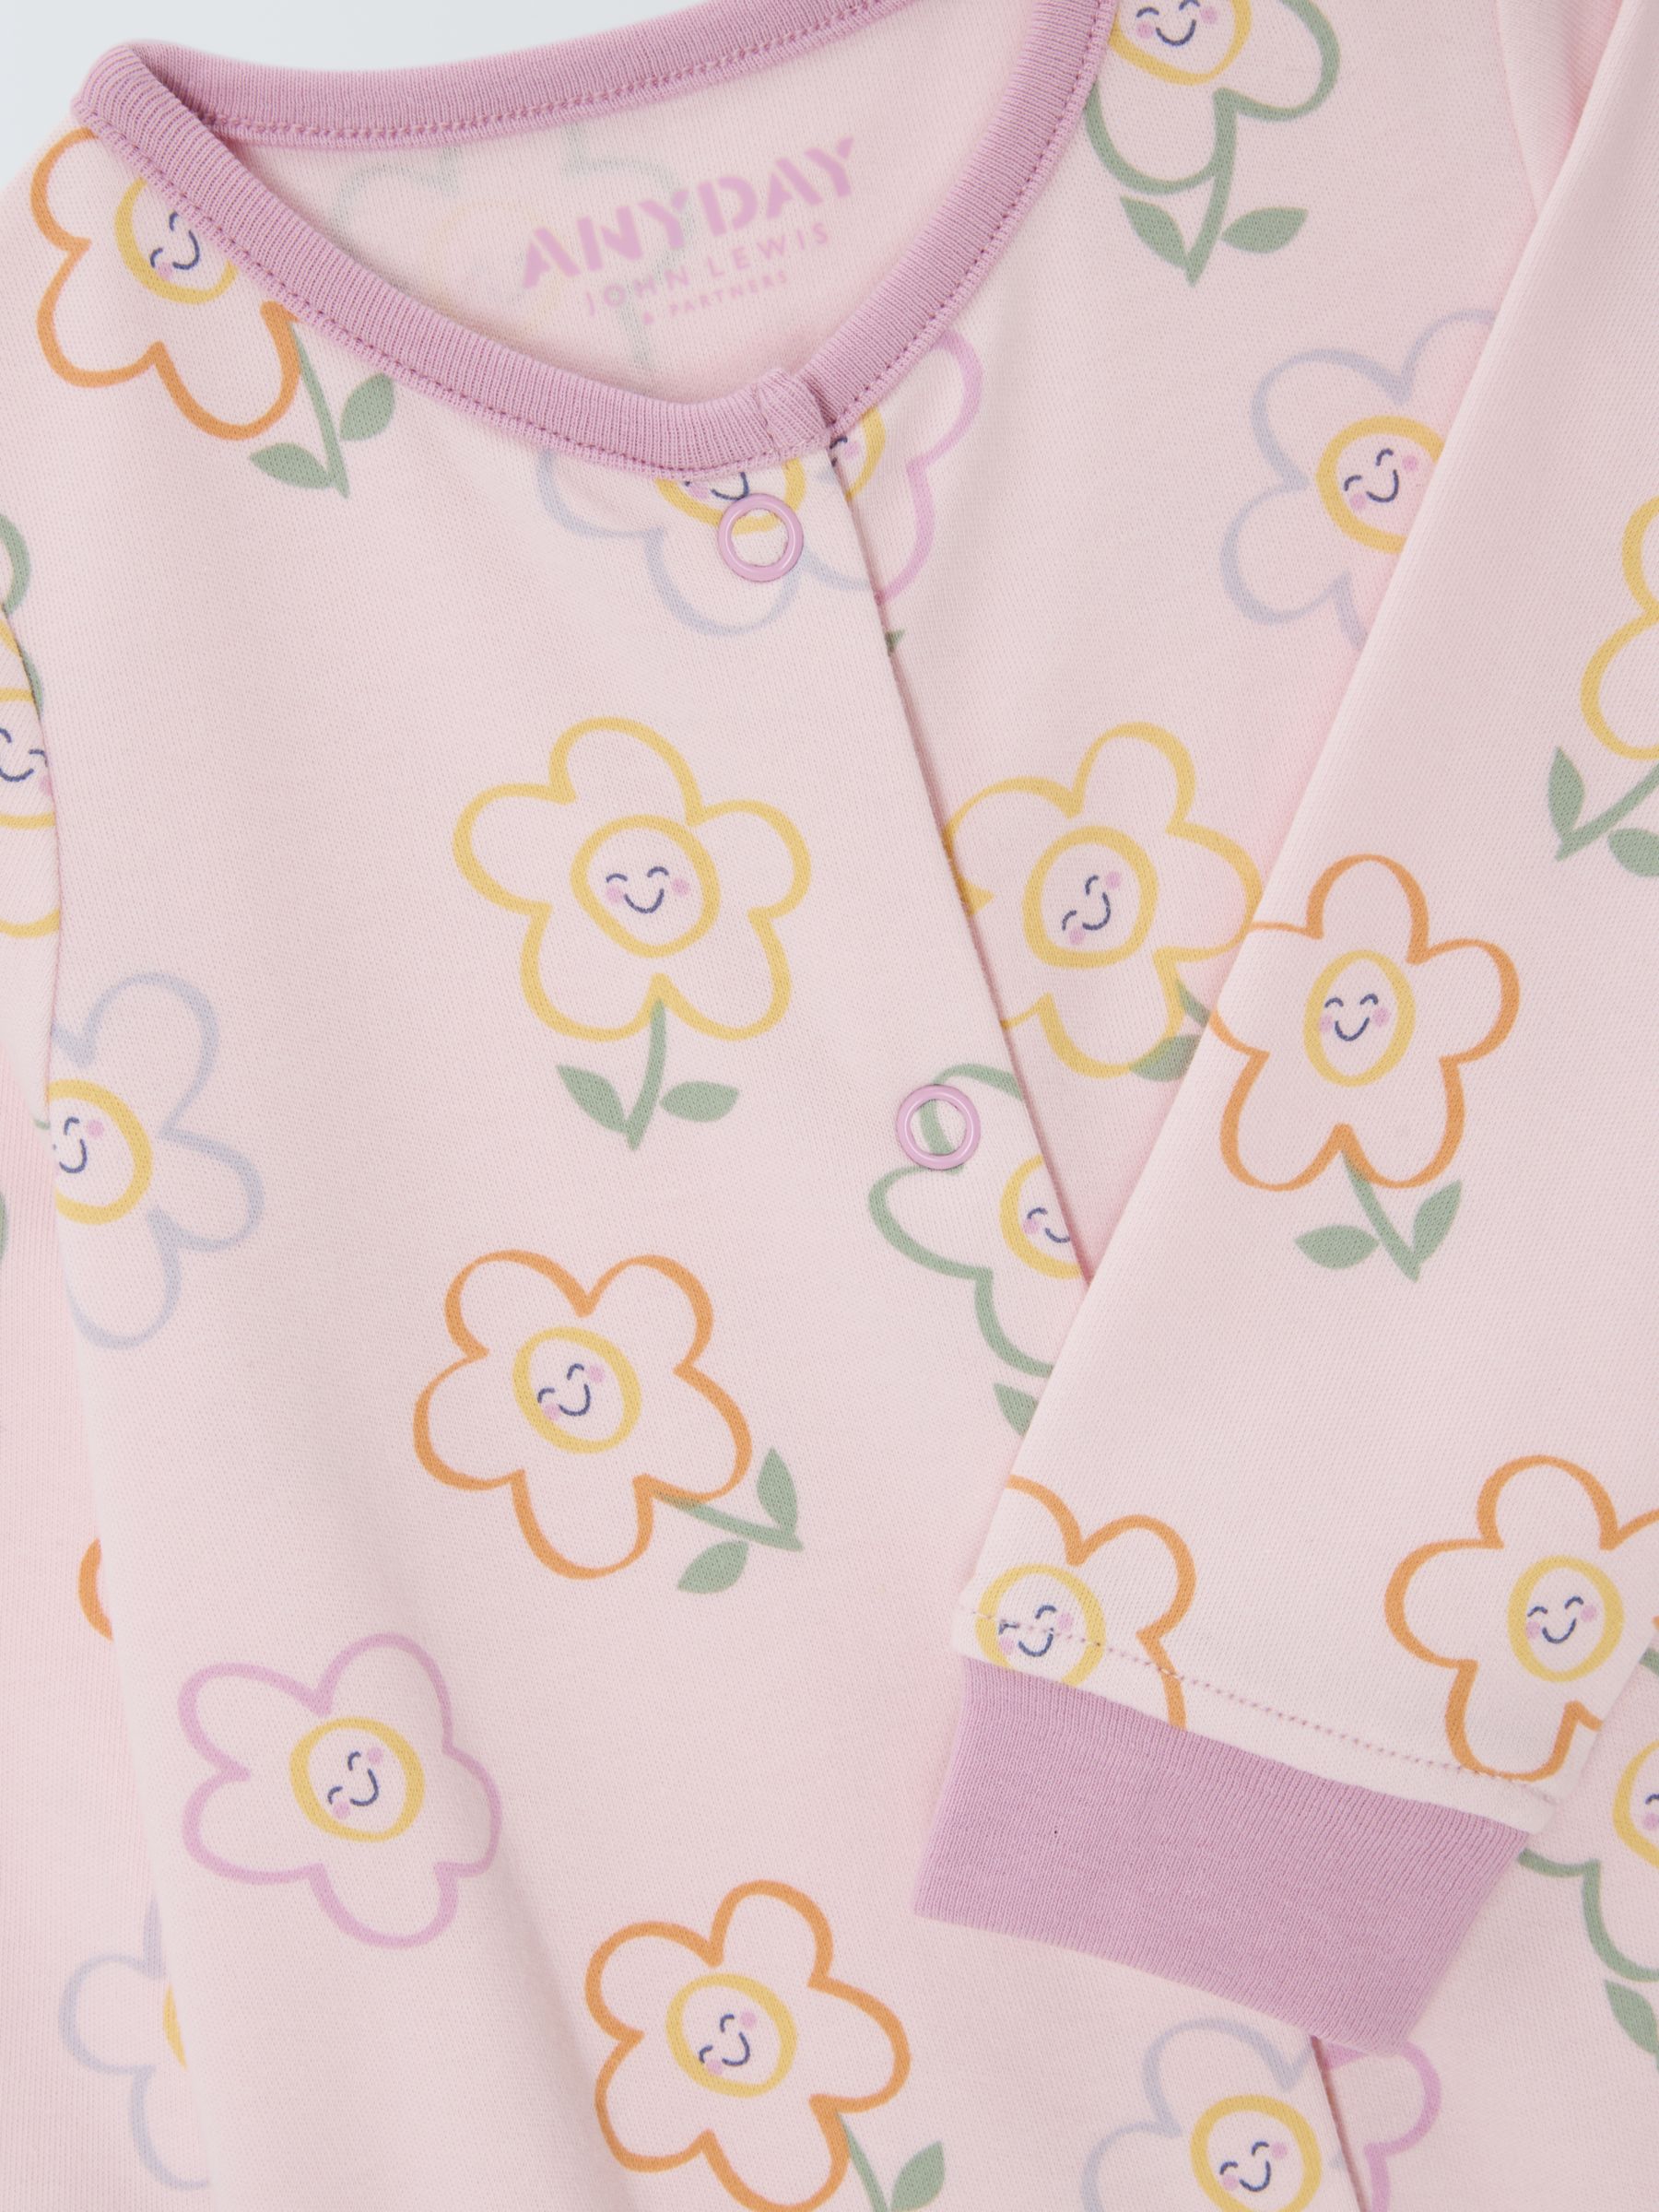 Buy John Lewis ANYDAY Baby Cotton Floral Sleepsuit, Pink Online at johnlewis.com